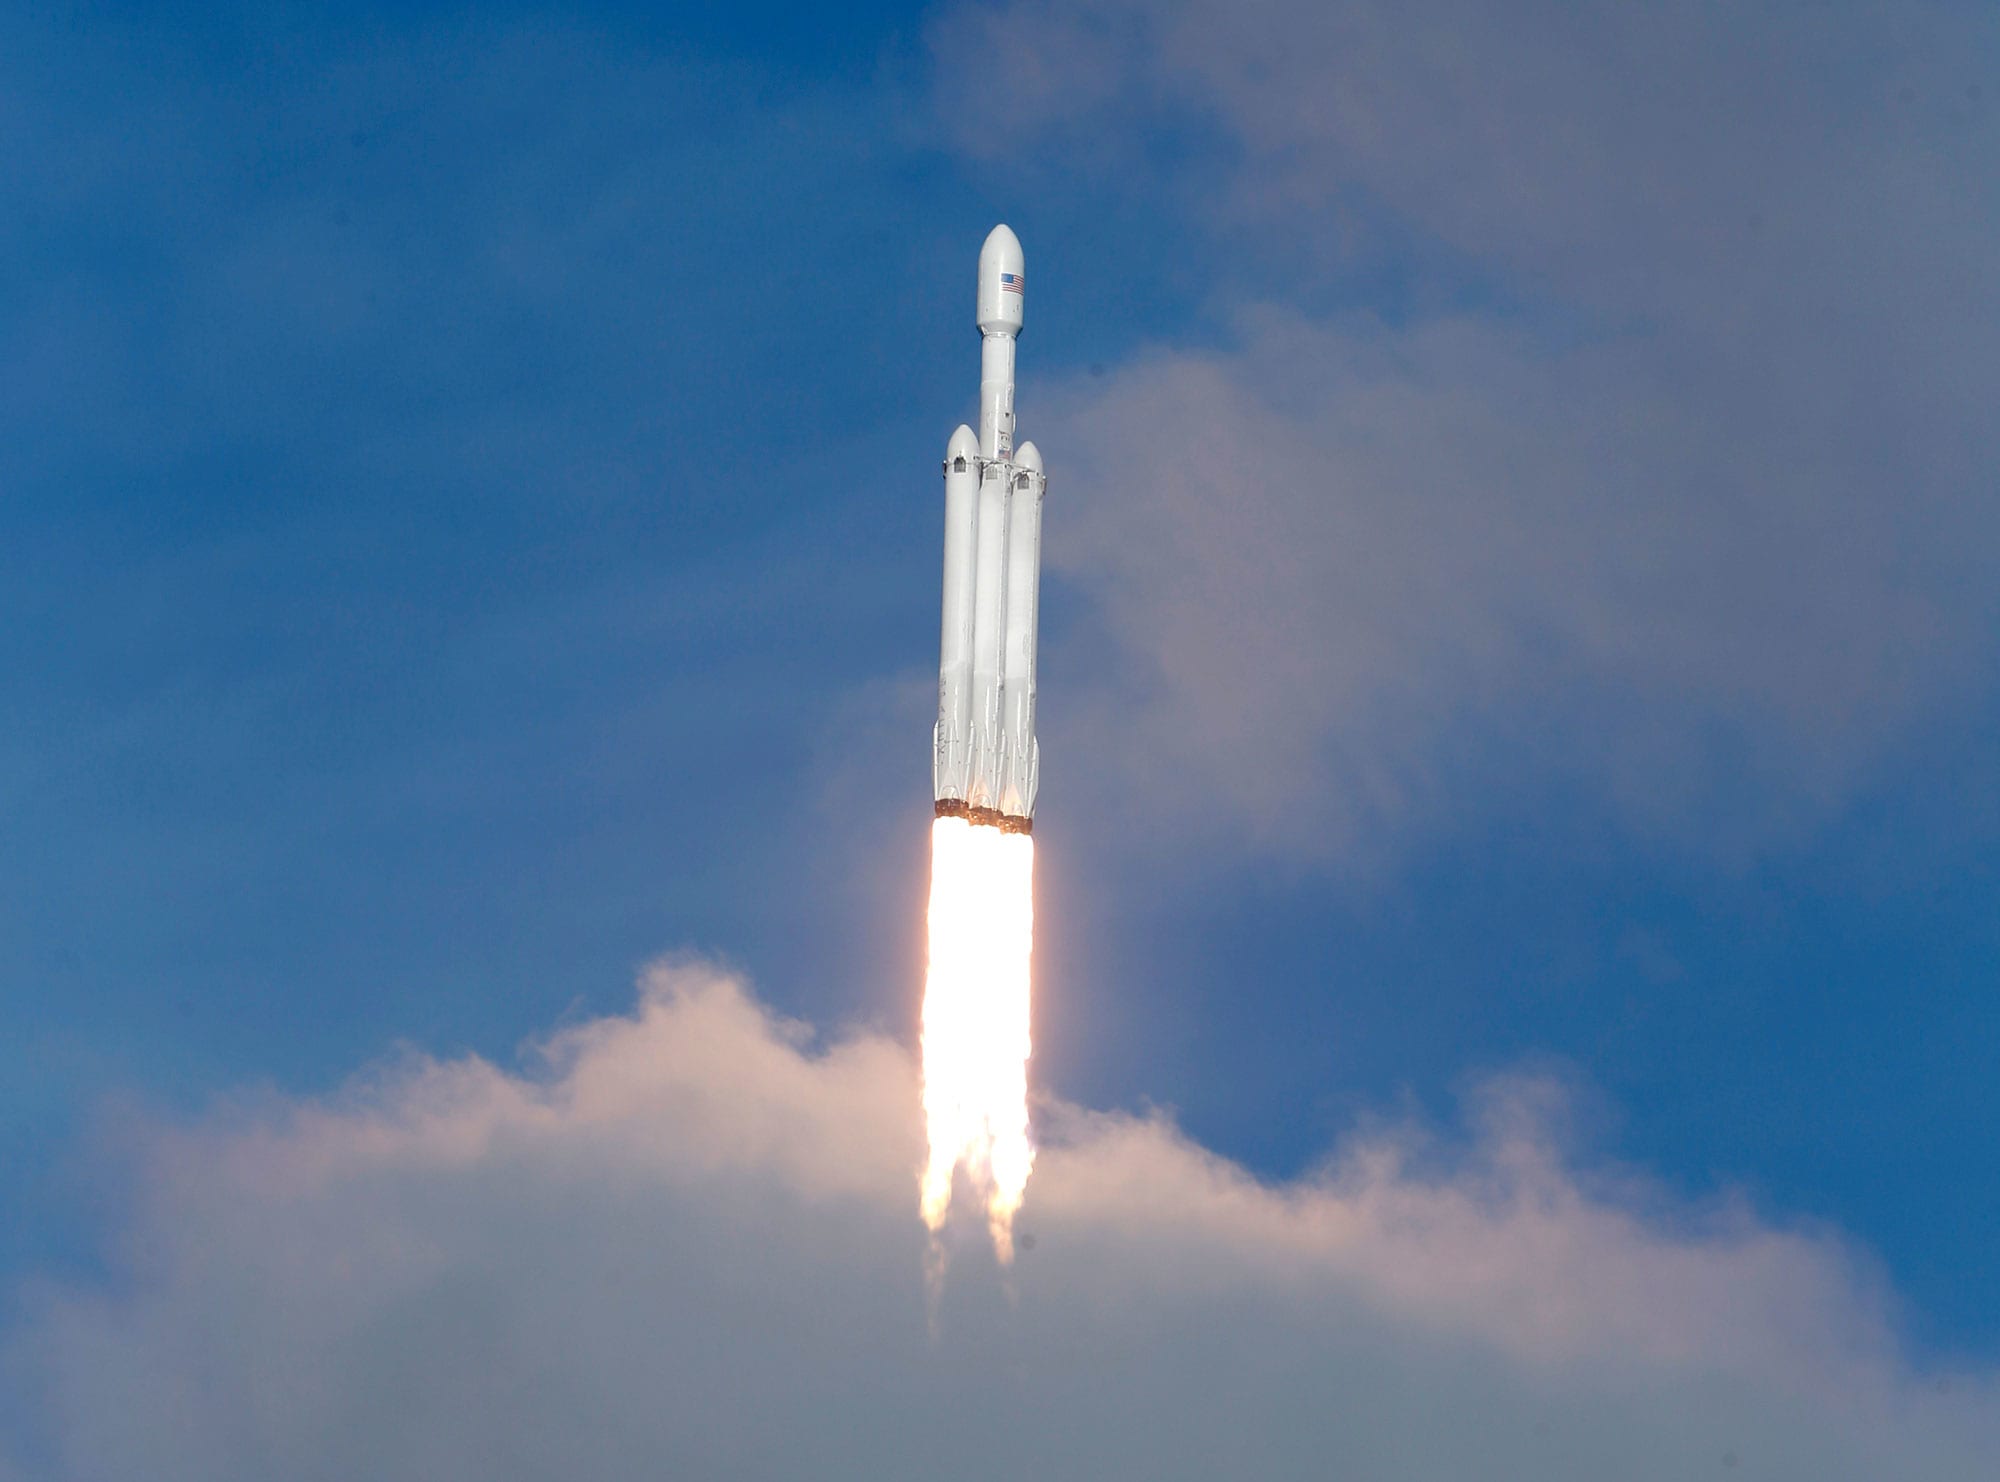 After Falcon Heavy success Elon Musk wants 'a new space race'